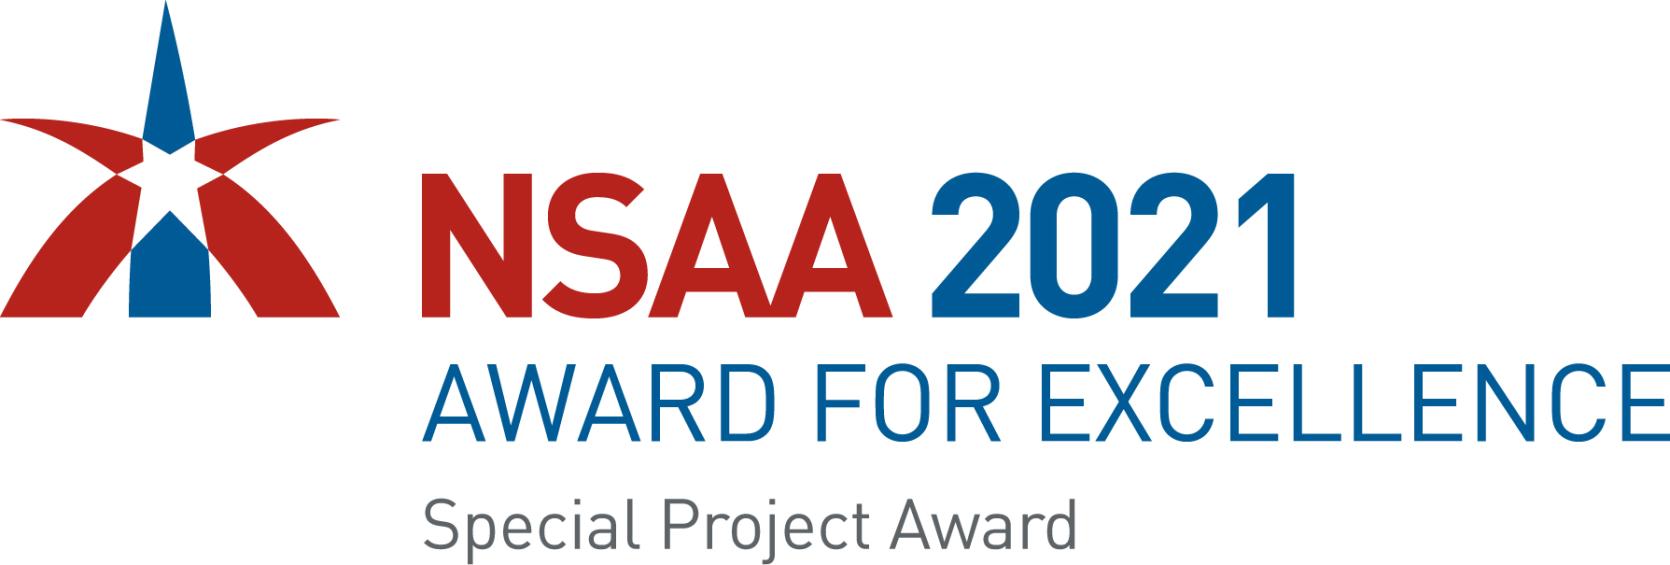 An image of the NSAA logo for the special projects award.